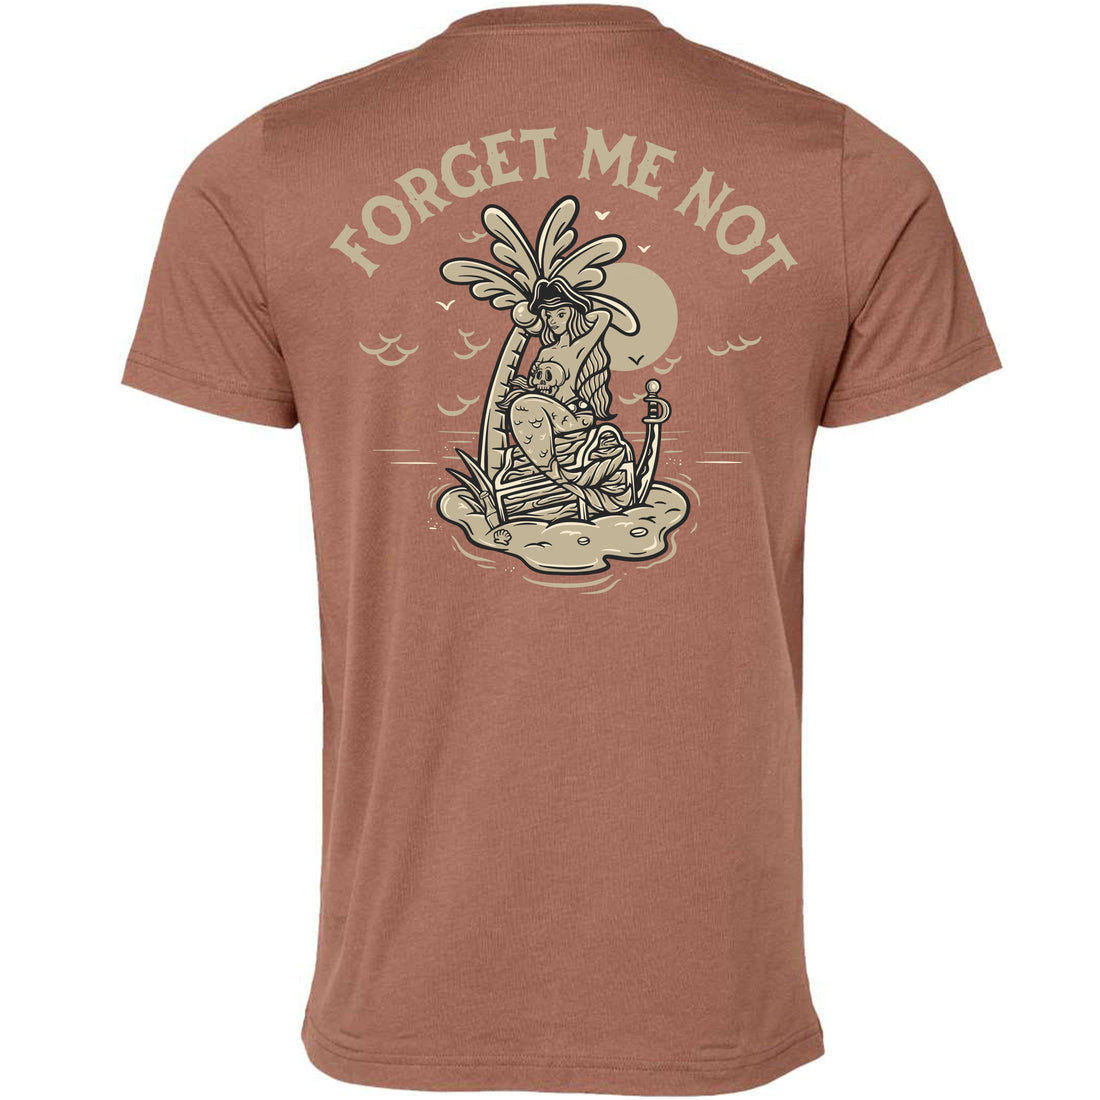 Forget Me Not Unisex Tee